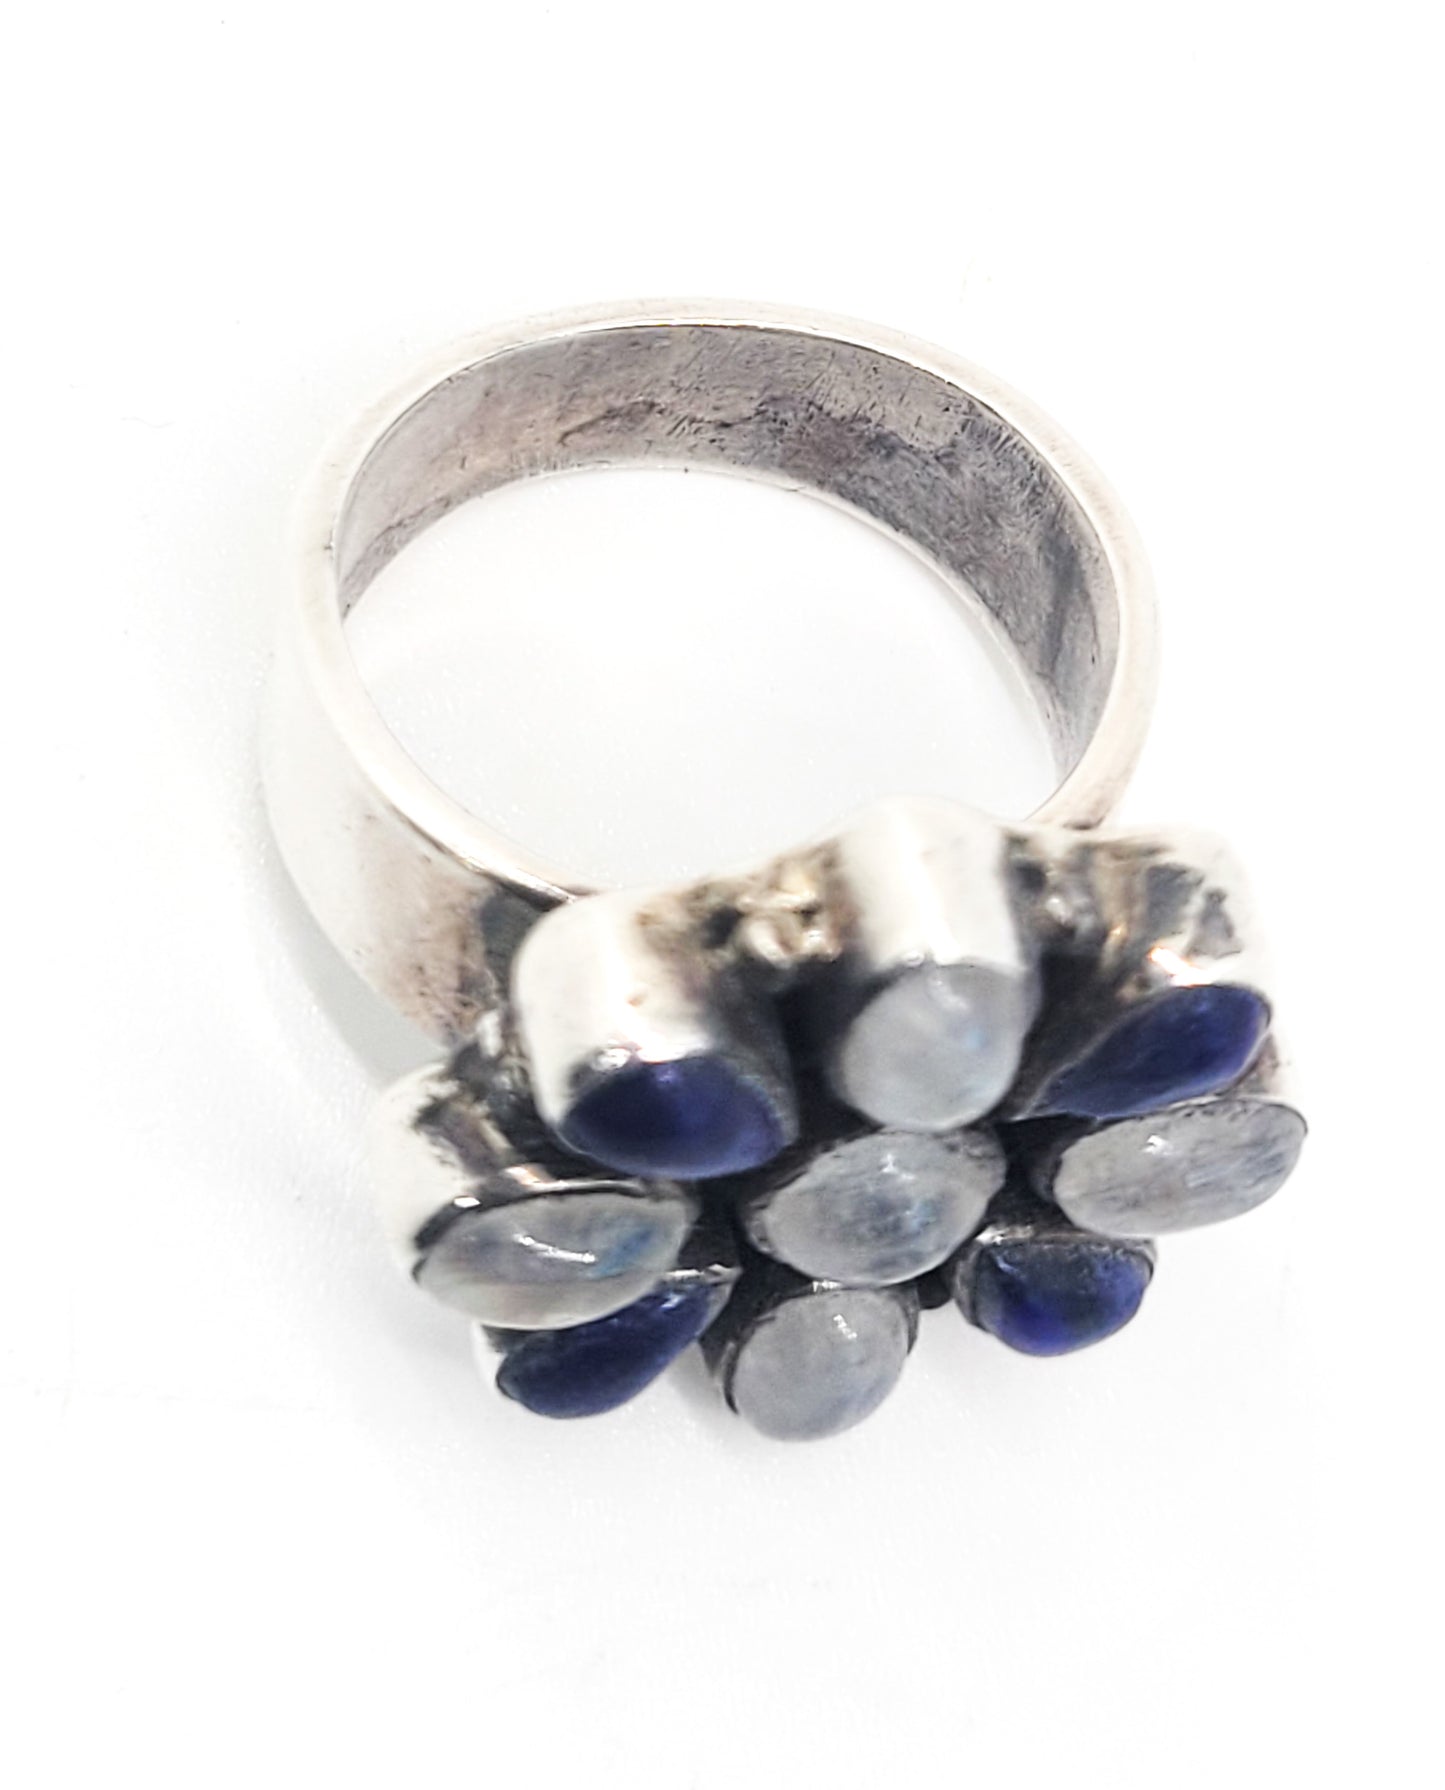 Blue moonstone and lapis lazuli vintage cluster flower sterling silver ring size 7.25